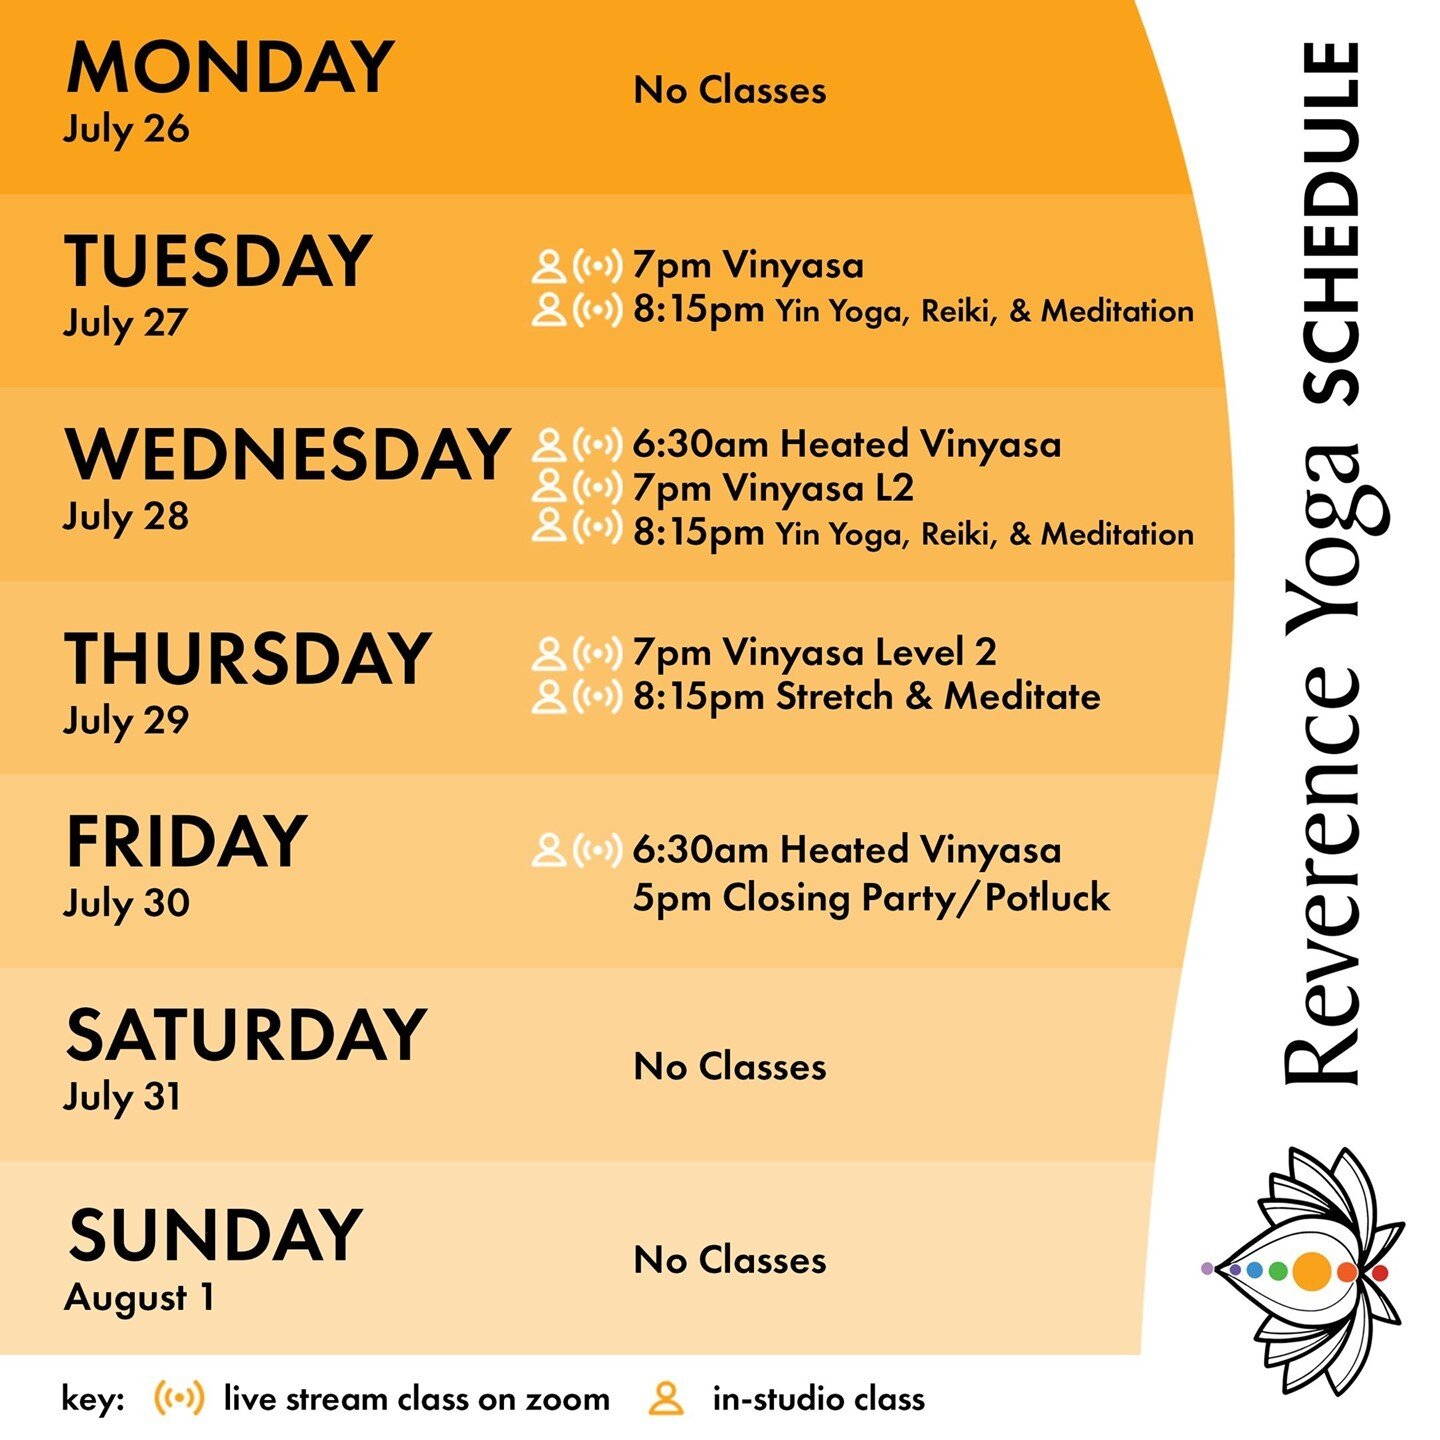 This is Reverence Yoga La Jolla's FINAL week and last chance to use unused classes on your account! Join us on Friday morning for our final class and Friday evening for our potluck closing party. Email us with any questions! Thank you, community, it'